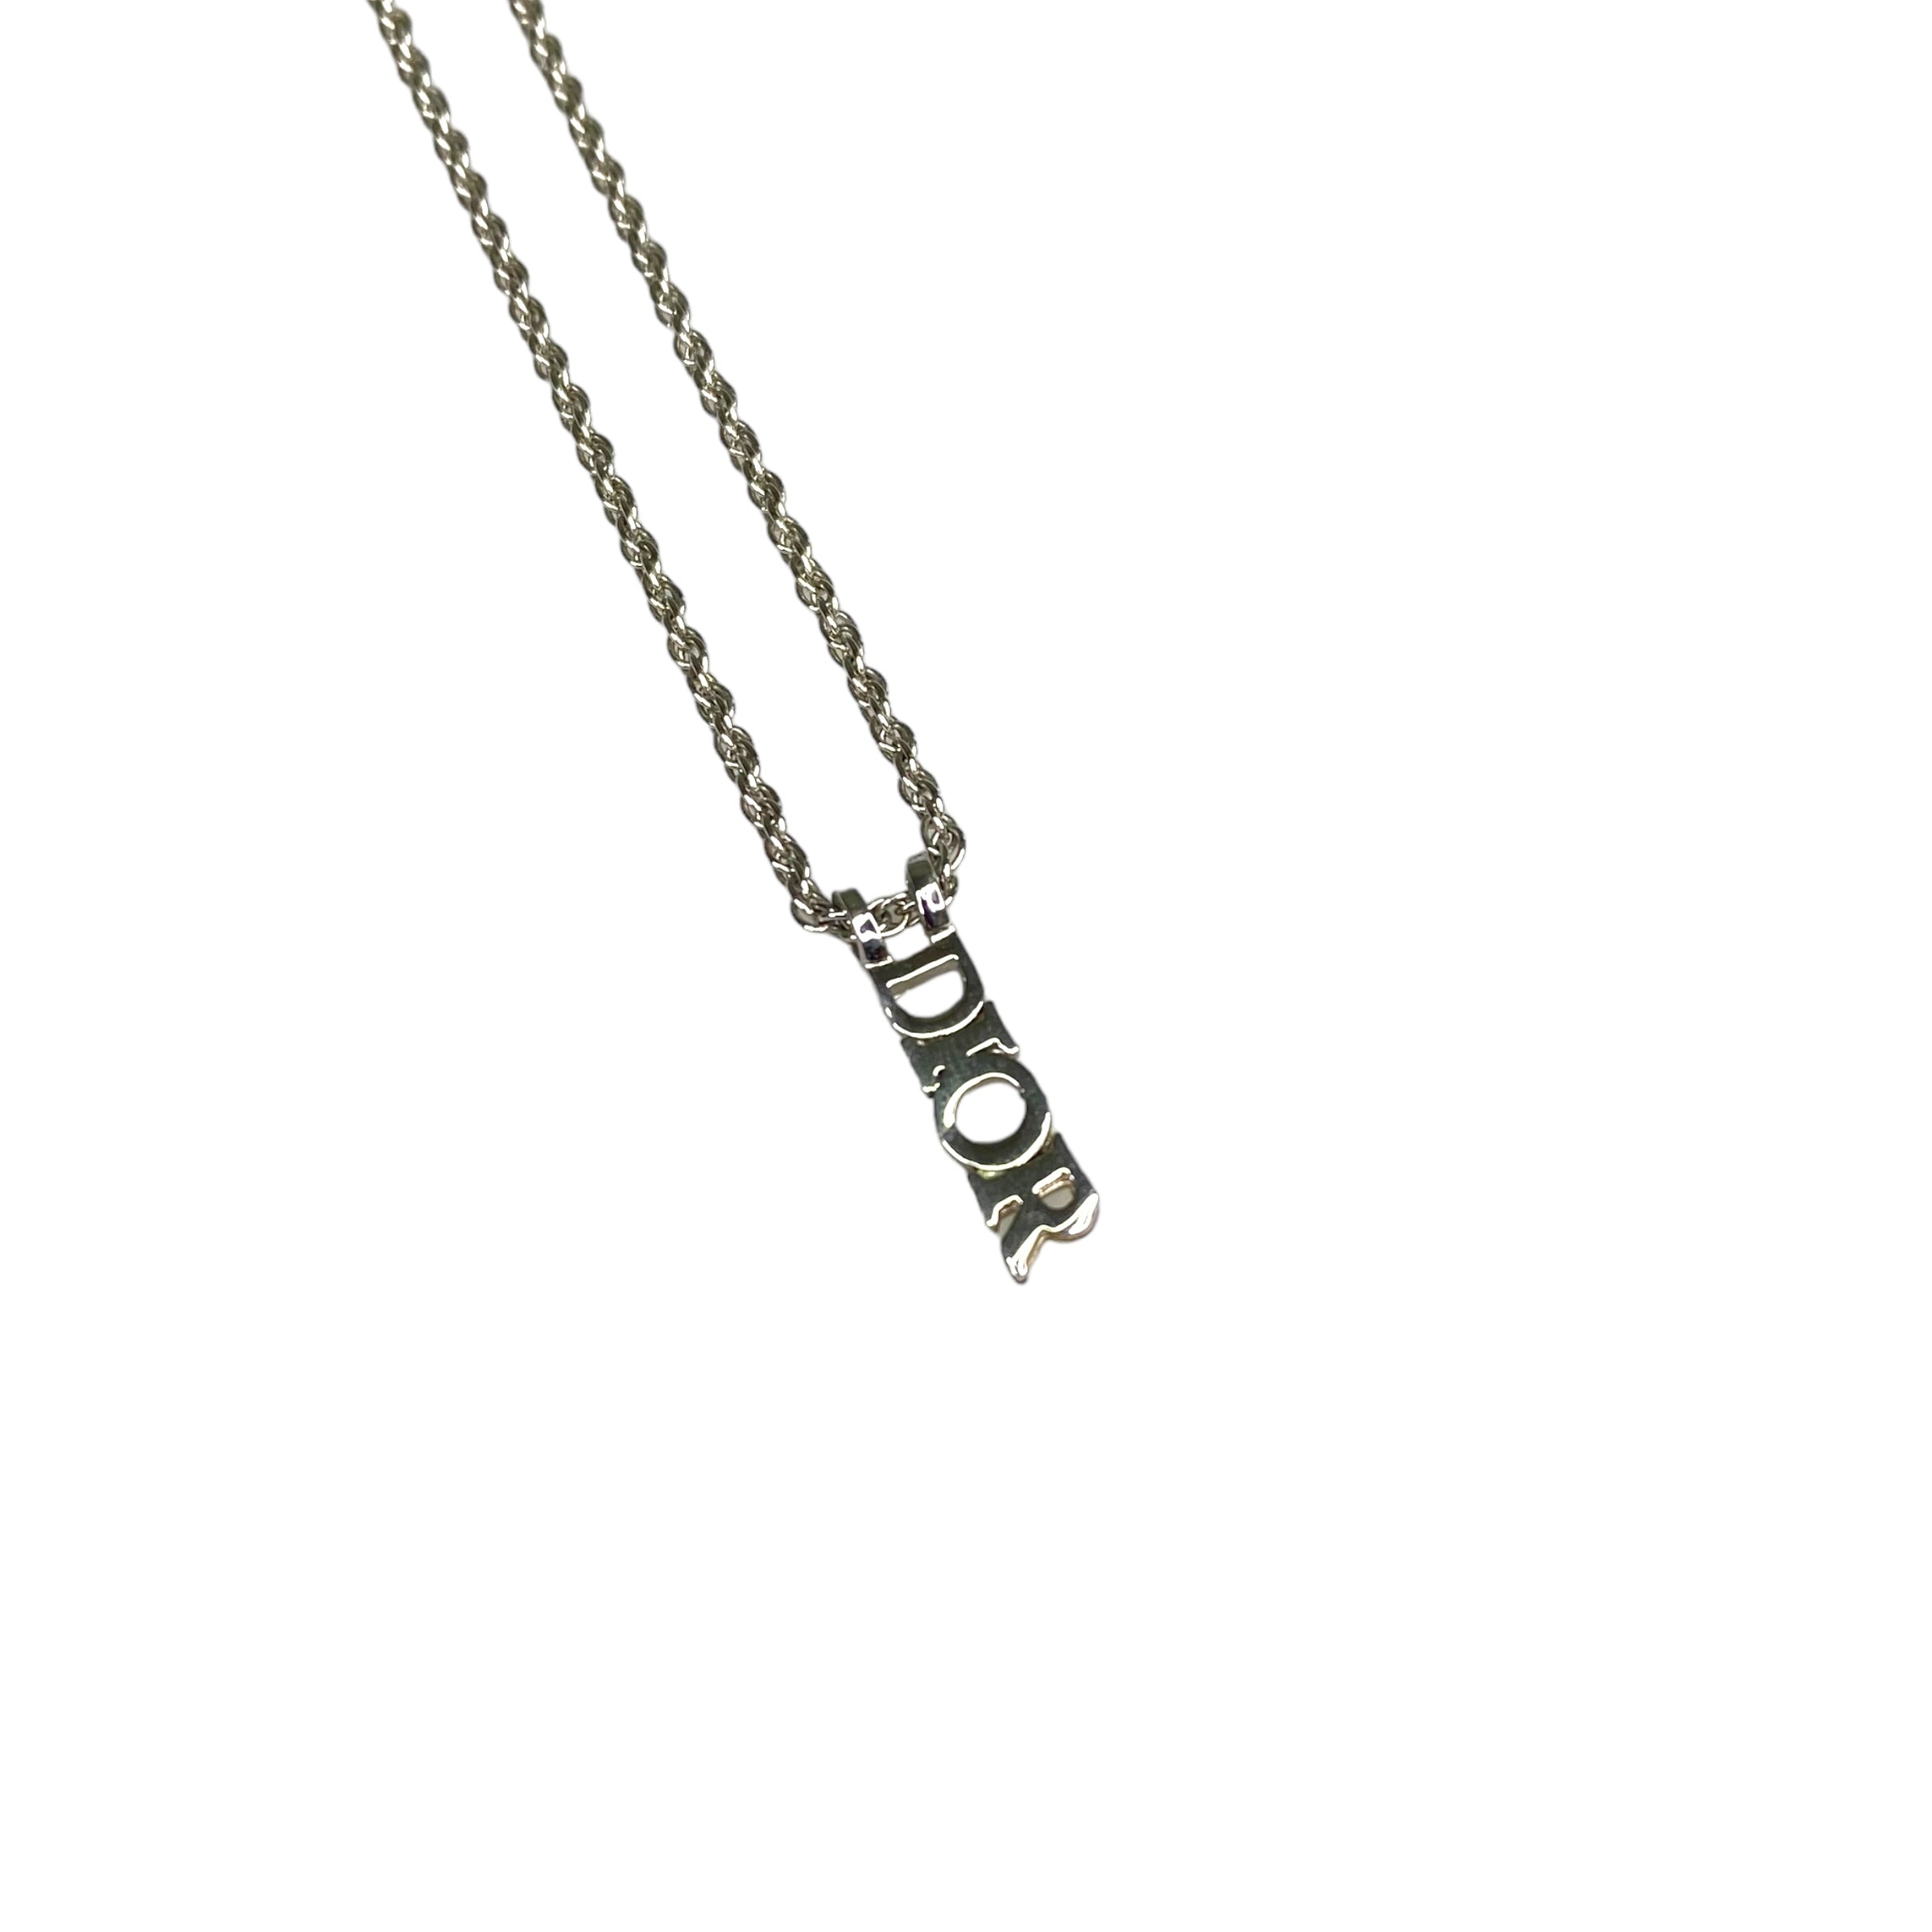 DIOR CAPITAL SPELLOUT PENDANT SILVER PLATED NECKLACE